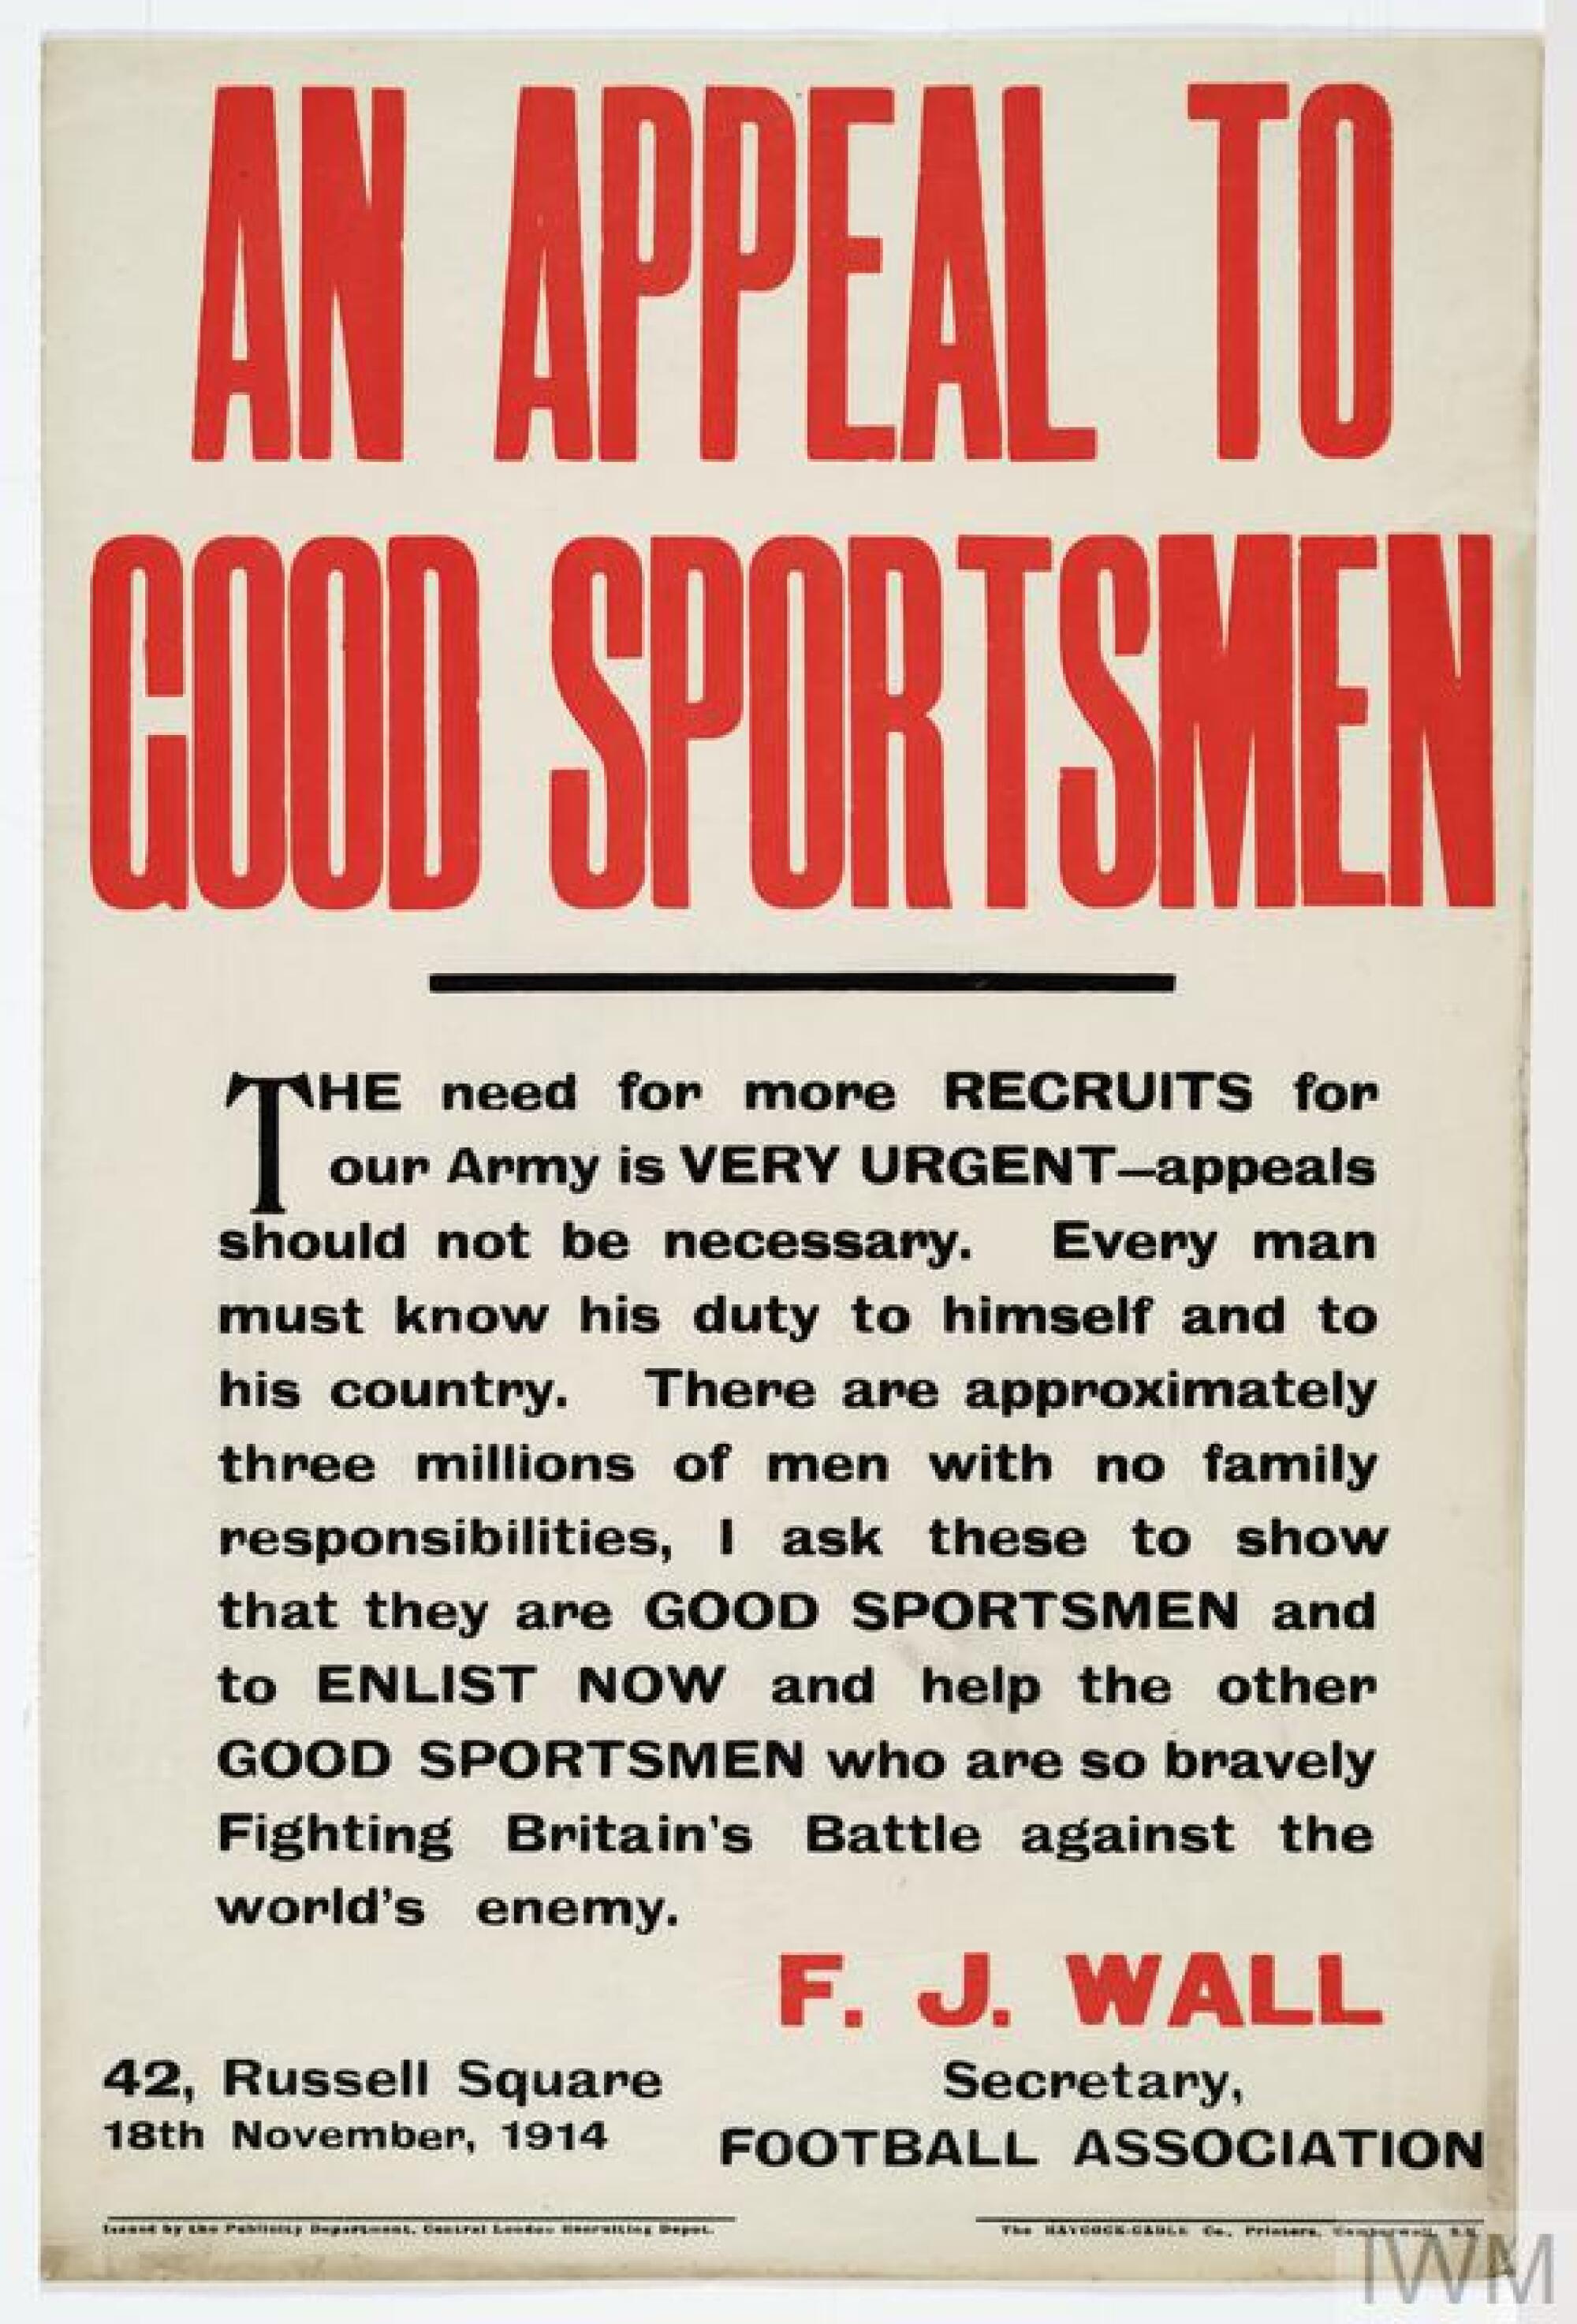 A British World War I recruiting poster urges young athletes to join the fight against the Germans